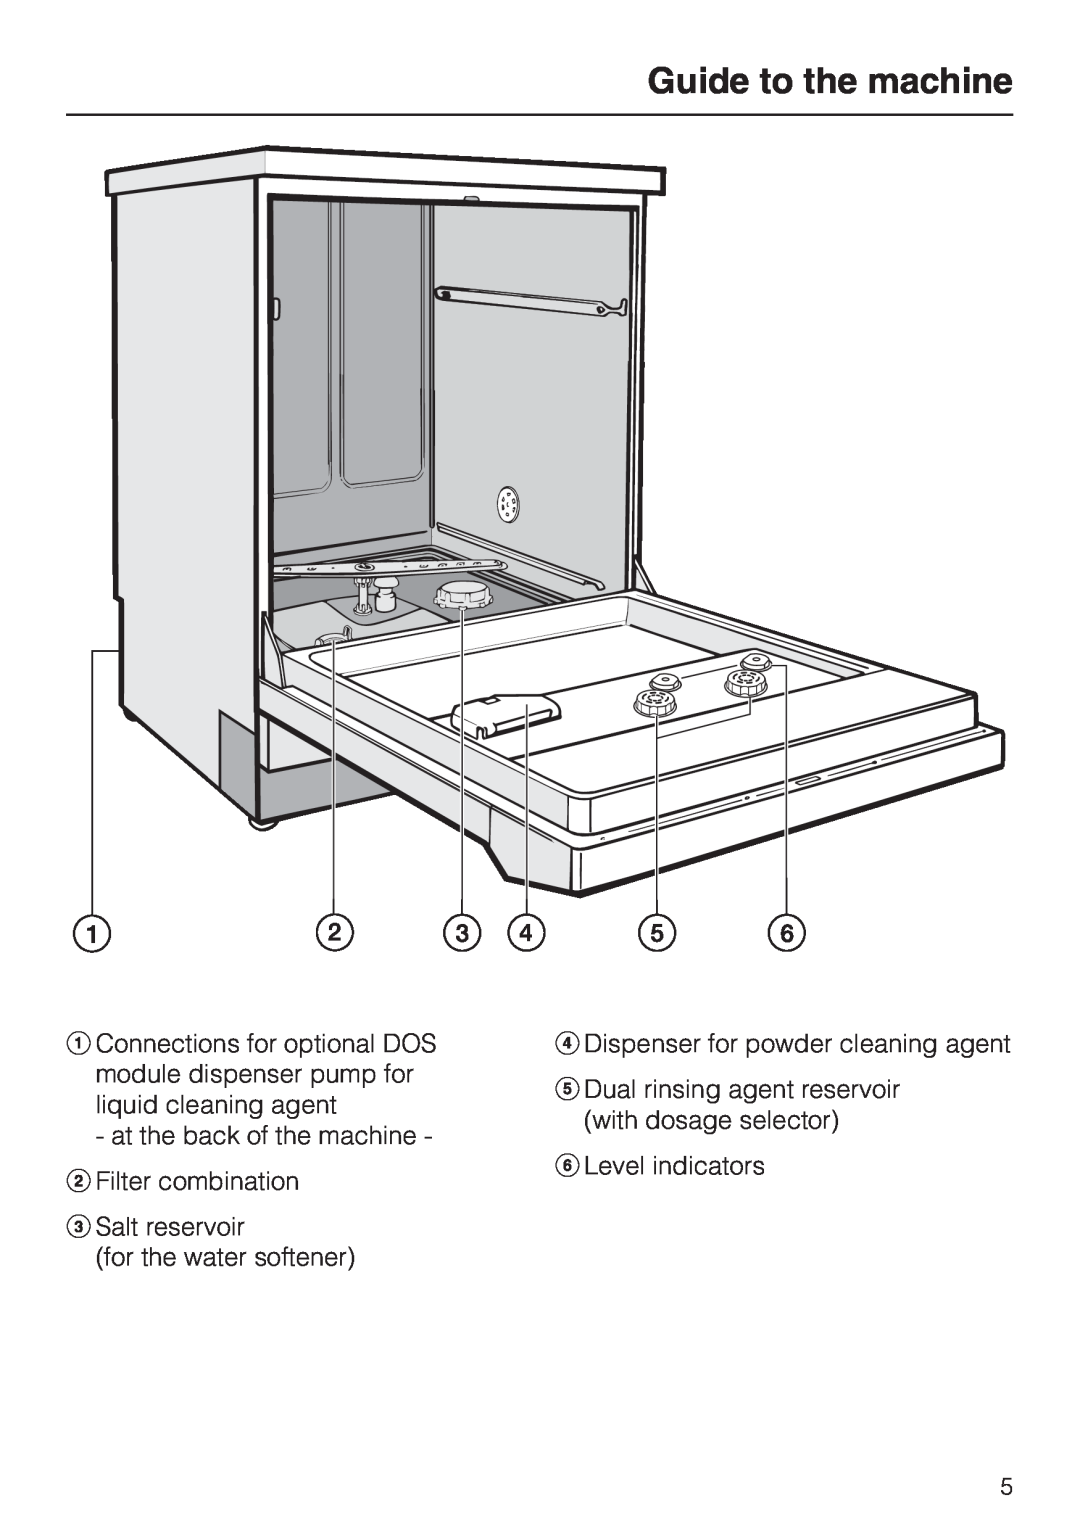 Miele G 7860 Guide to the machine, at the back of the machine bFilter combination, cSalt reservoir for the water softener 